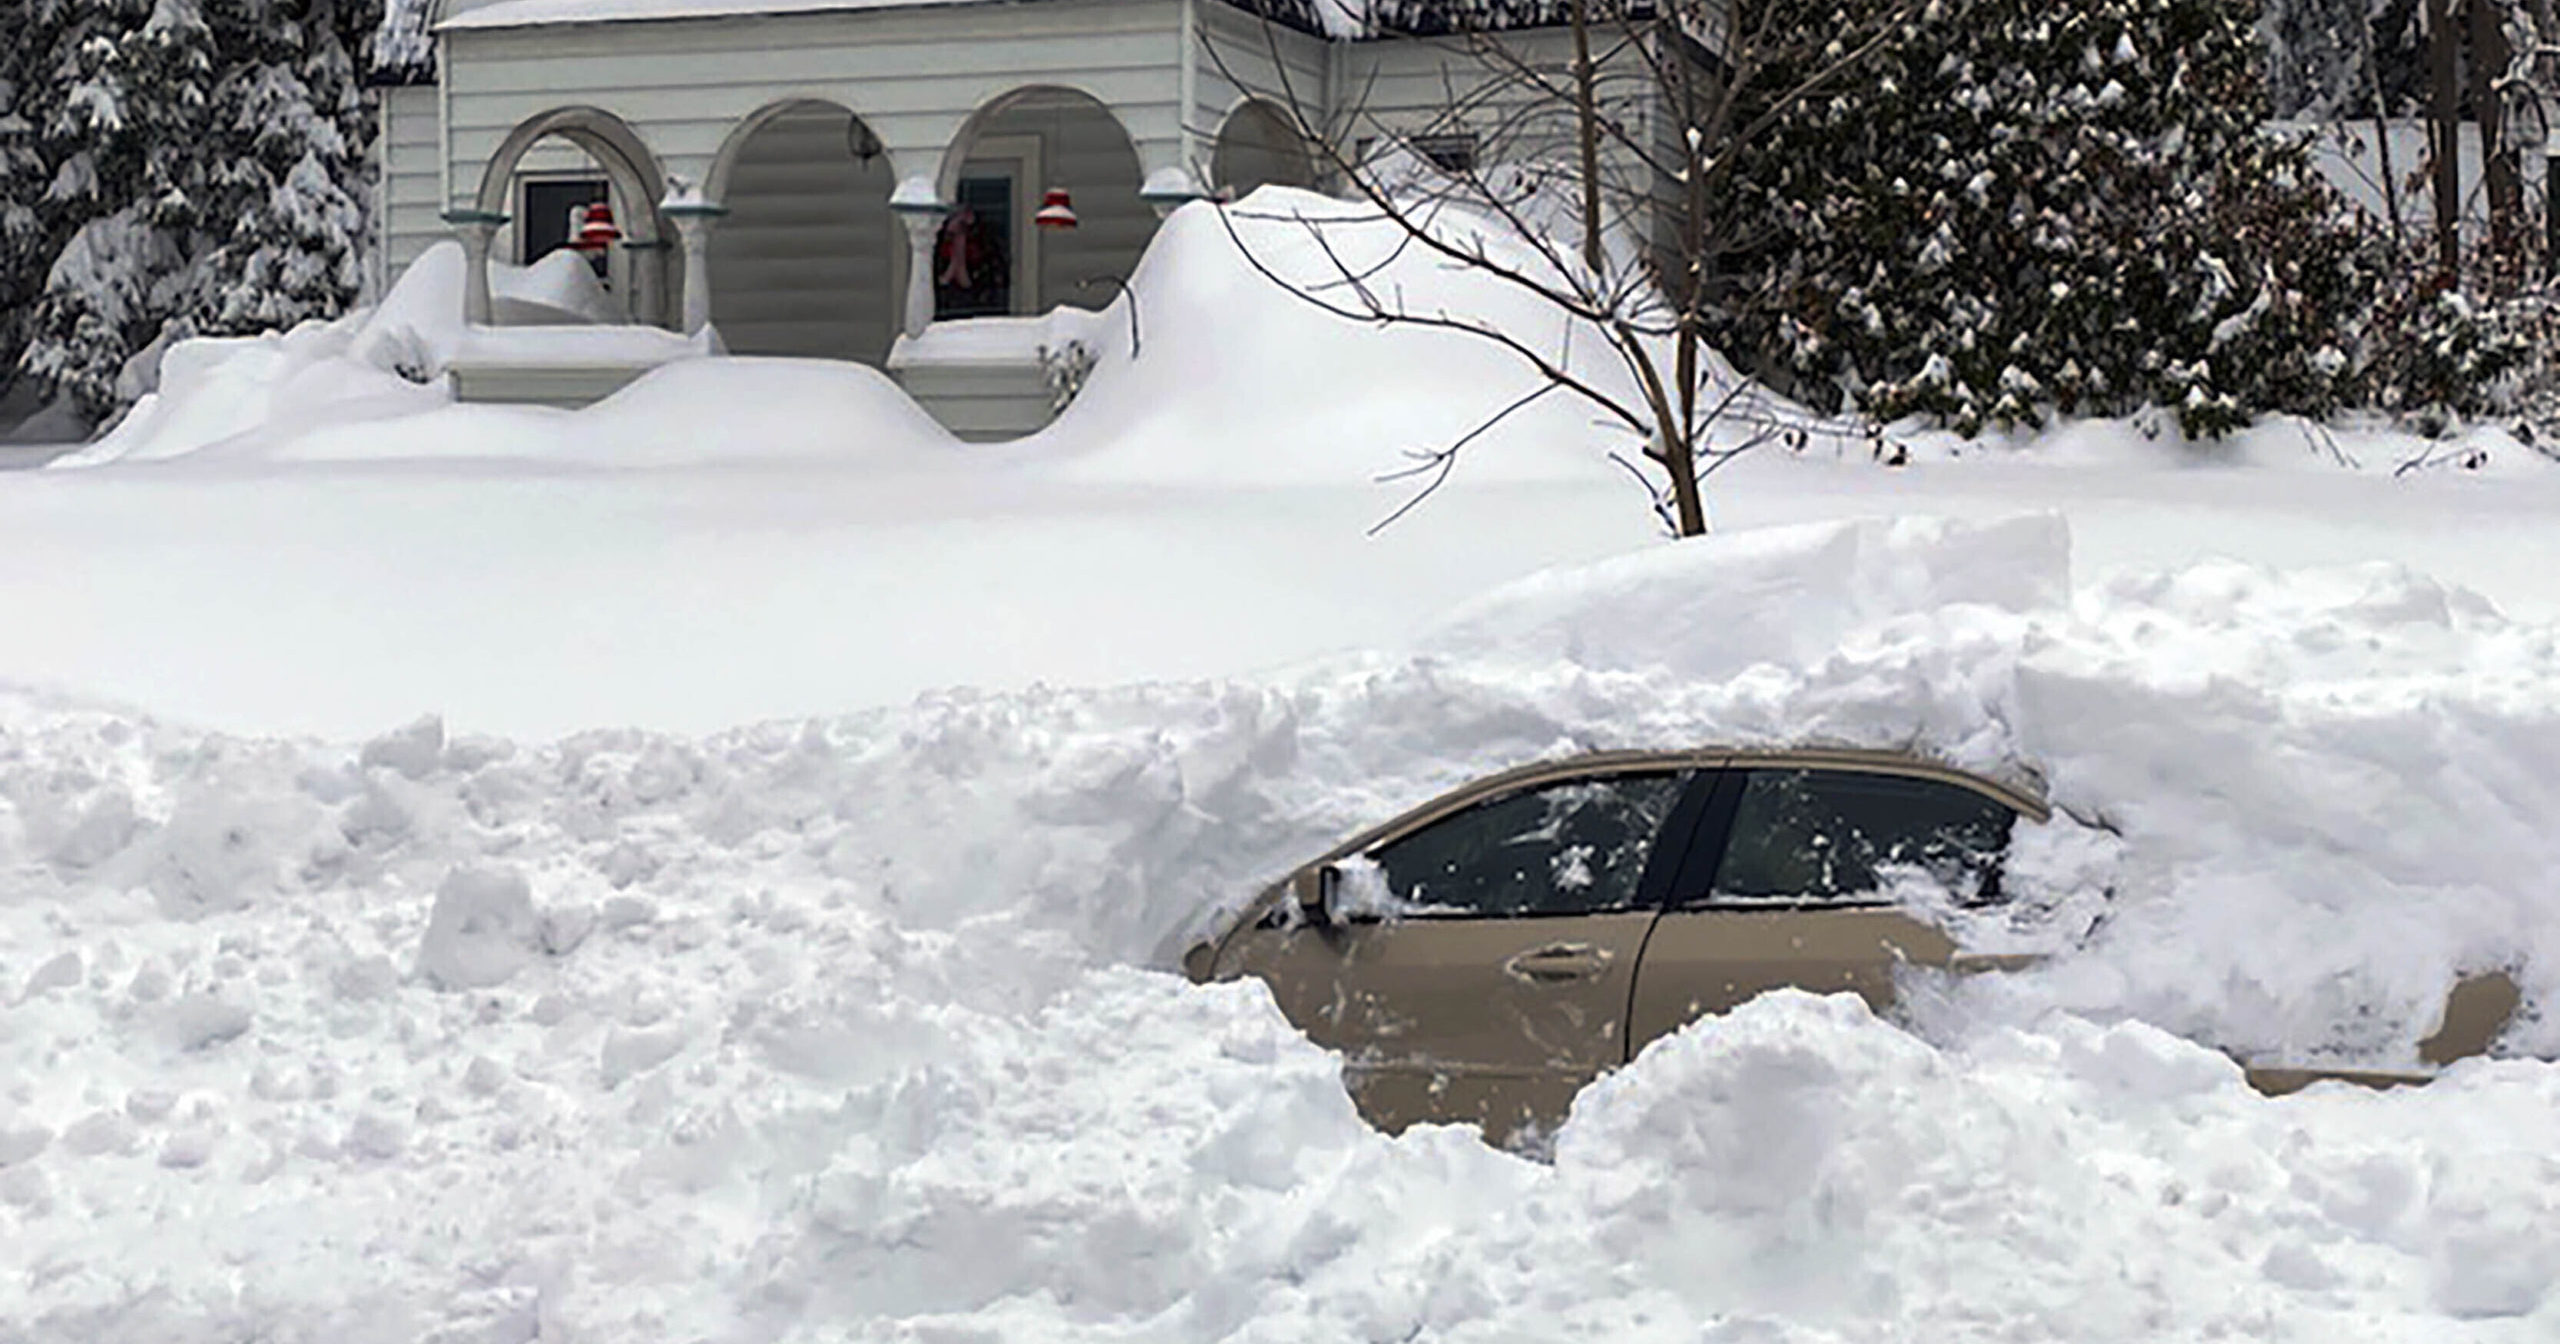 This photo shows a car in Owego, New York, from which a New York State Police sergeant rescued Kevin Kresen, 58, who was stranded for 10 hours, covered by nearly 4 feet of snow thrown by a plow.